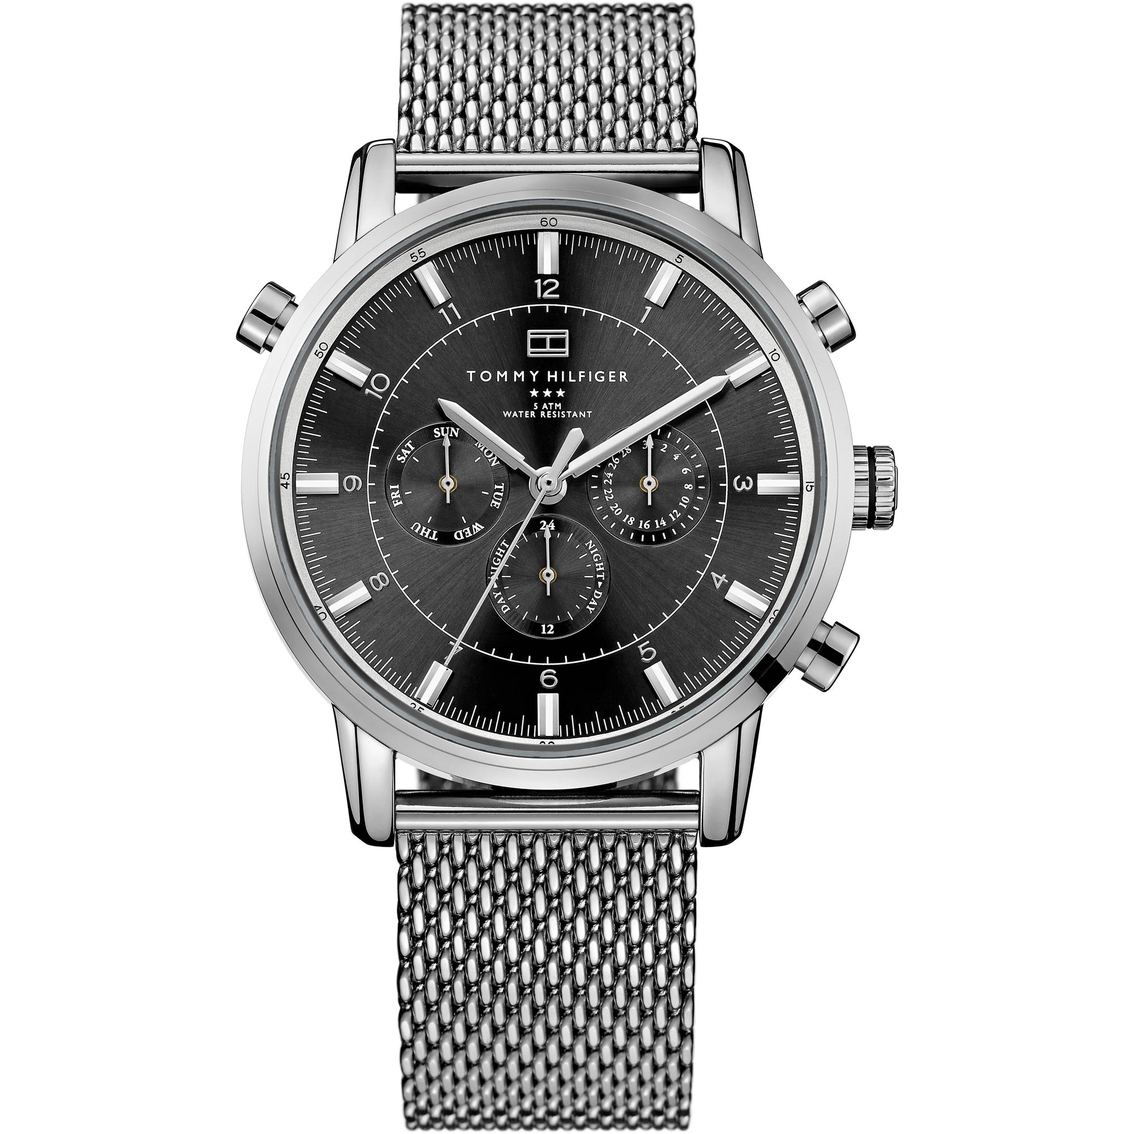 Tommy Hilfiger Men's Sport Lux Watch With Mesh Bracelet 44mm 1790877 | Stainless Steel Band | Valentine's Guide | Shop The Exchange